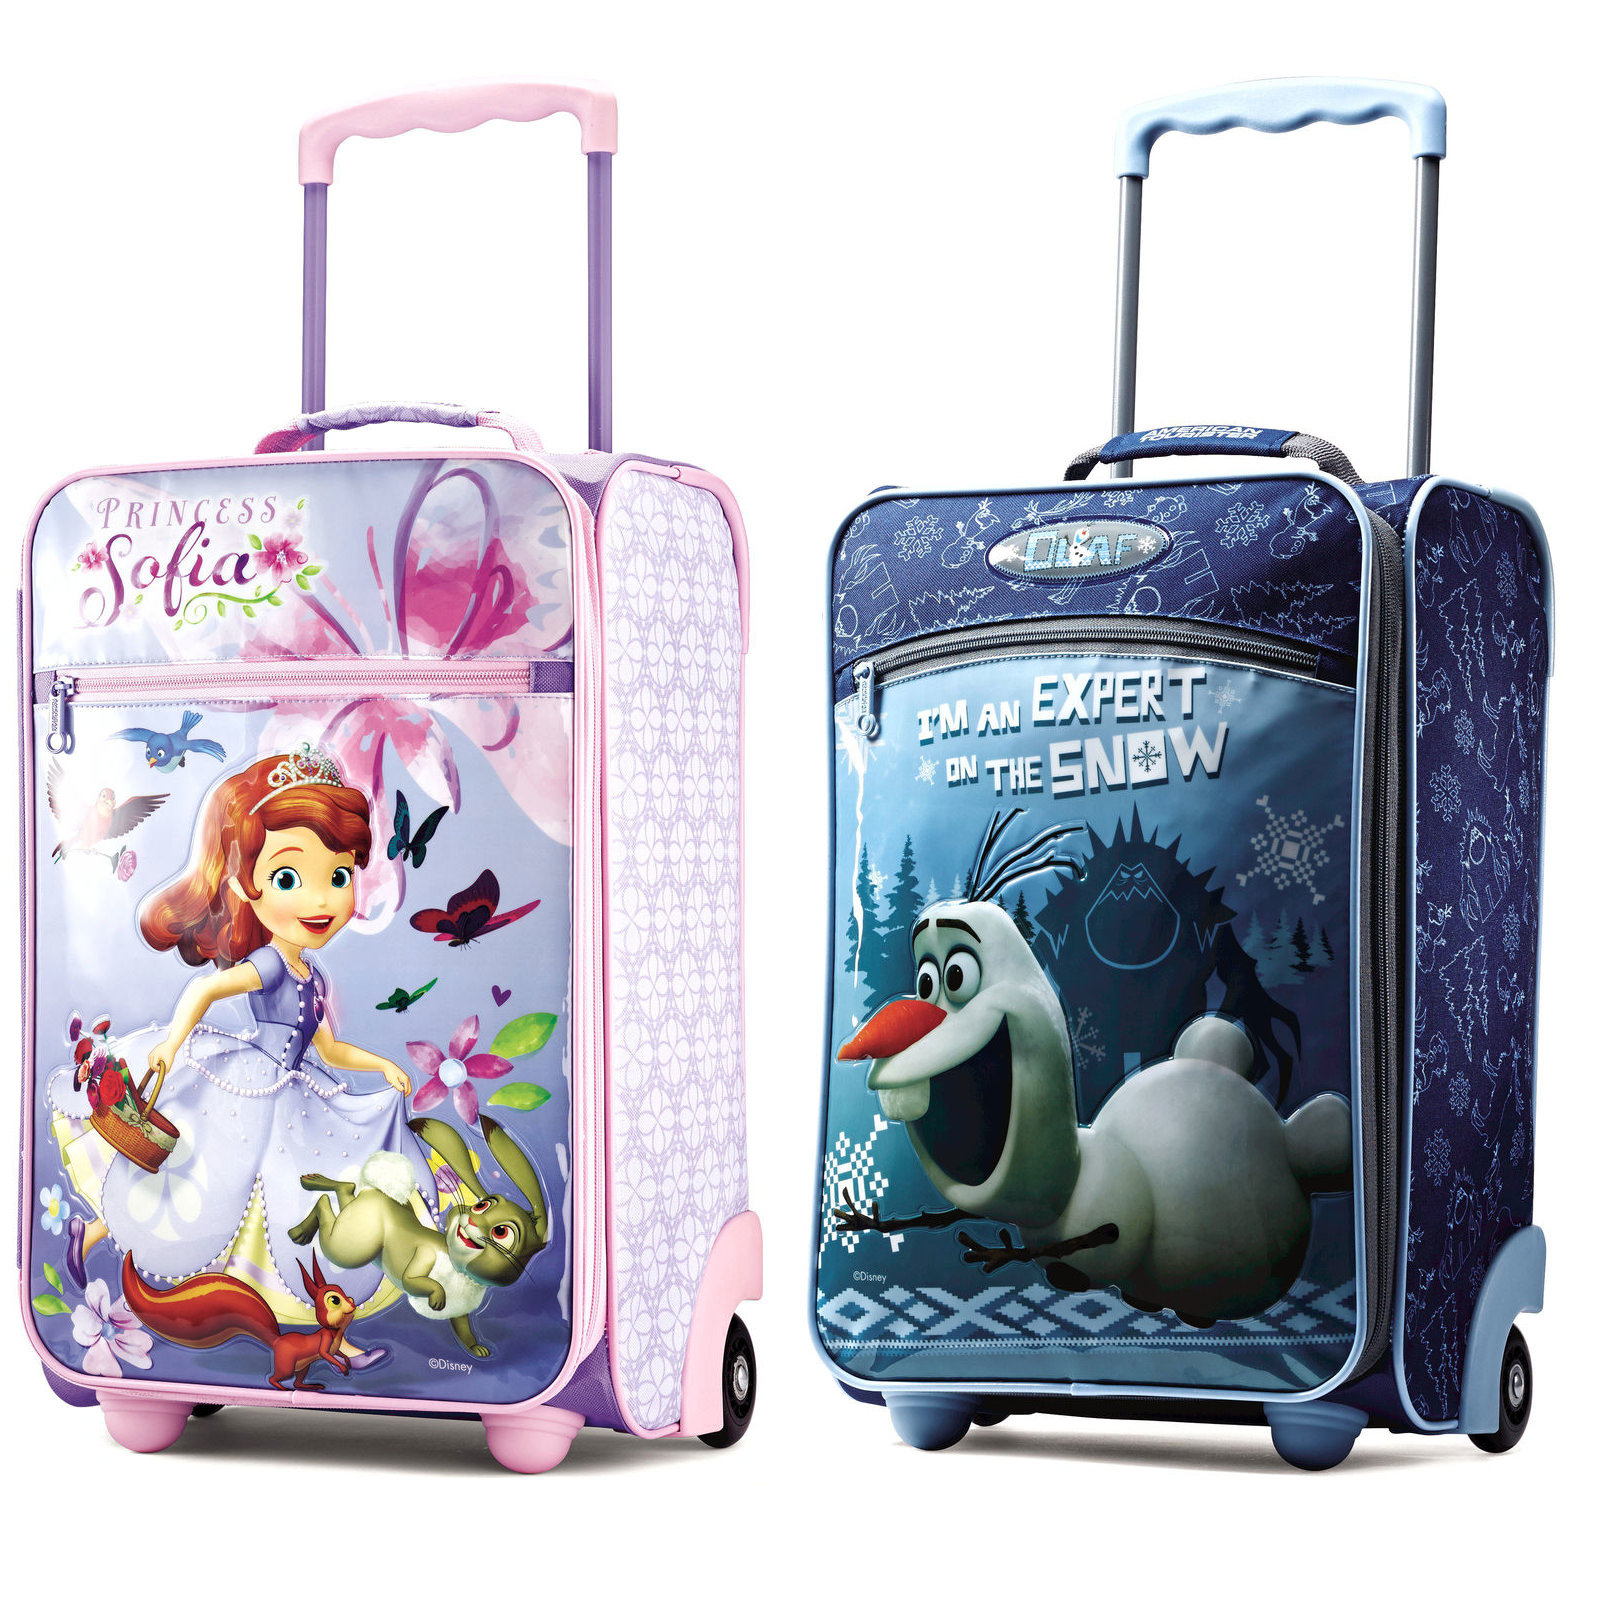 Sofia the First & Olaf American Tourister Disney Upright 18″ Roller Suitcases Only $23.99 Shipped!